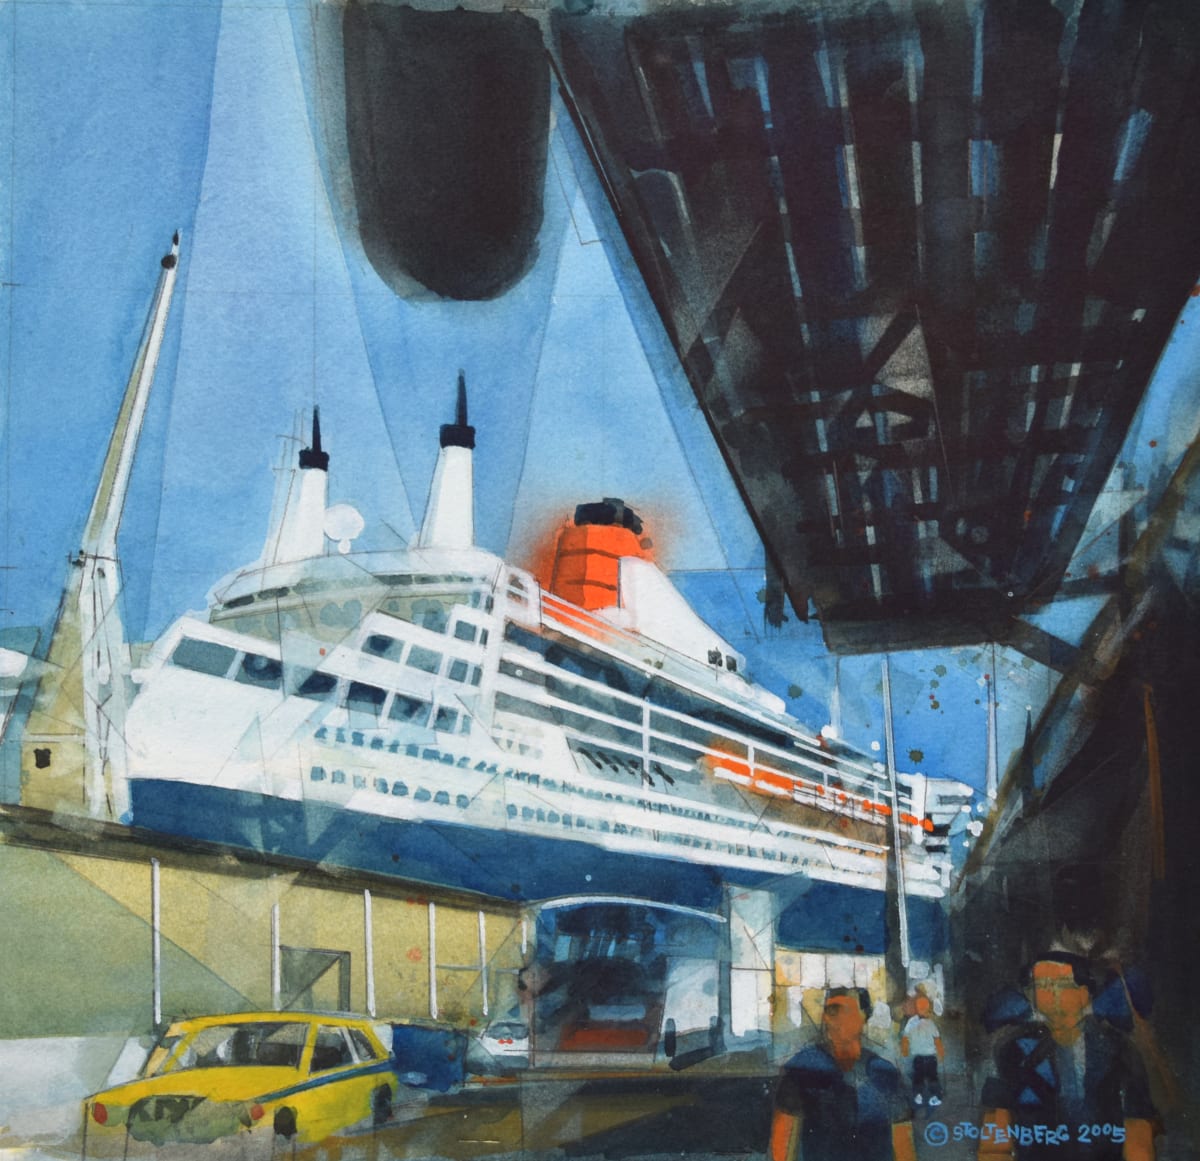 Queen Mary 2 in Madeira by Donald Stoltenberg  Image: Queen Mary 2 in Madeira by Donald Stoltenberg